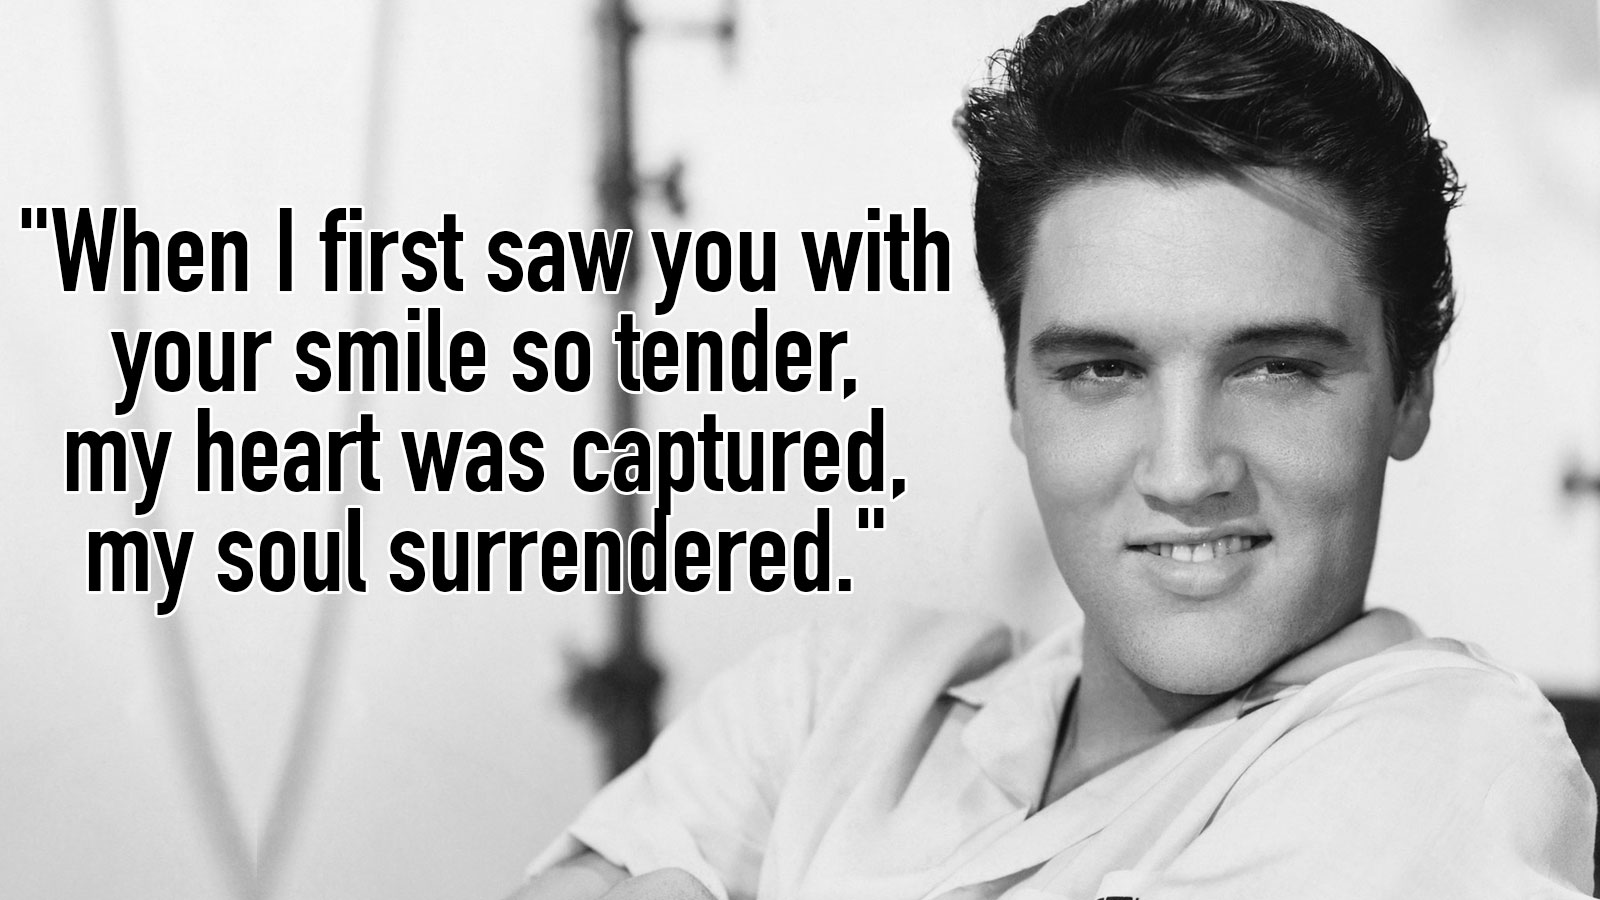 Can You Guess the Elvis Presley Song This Lyric Is From? Quiz 16